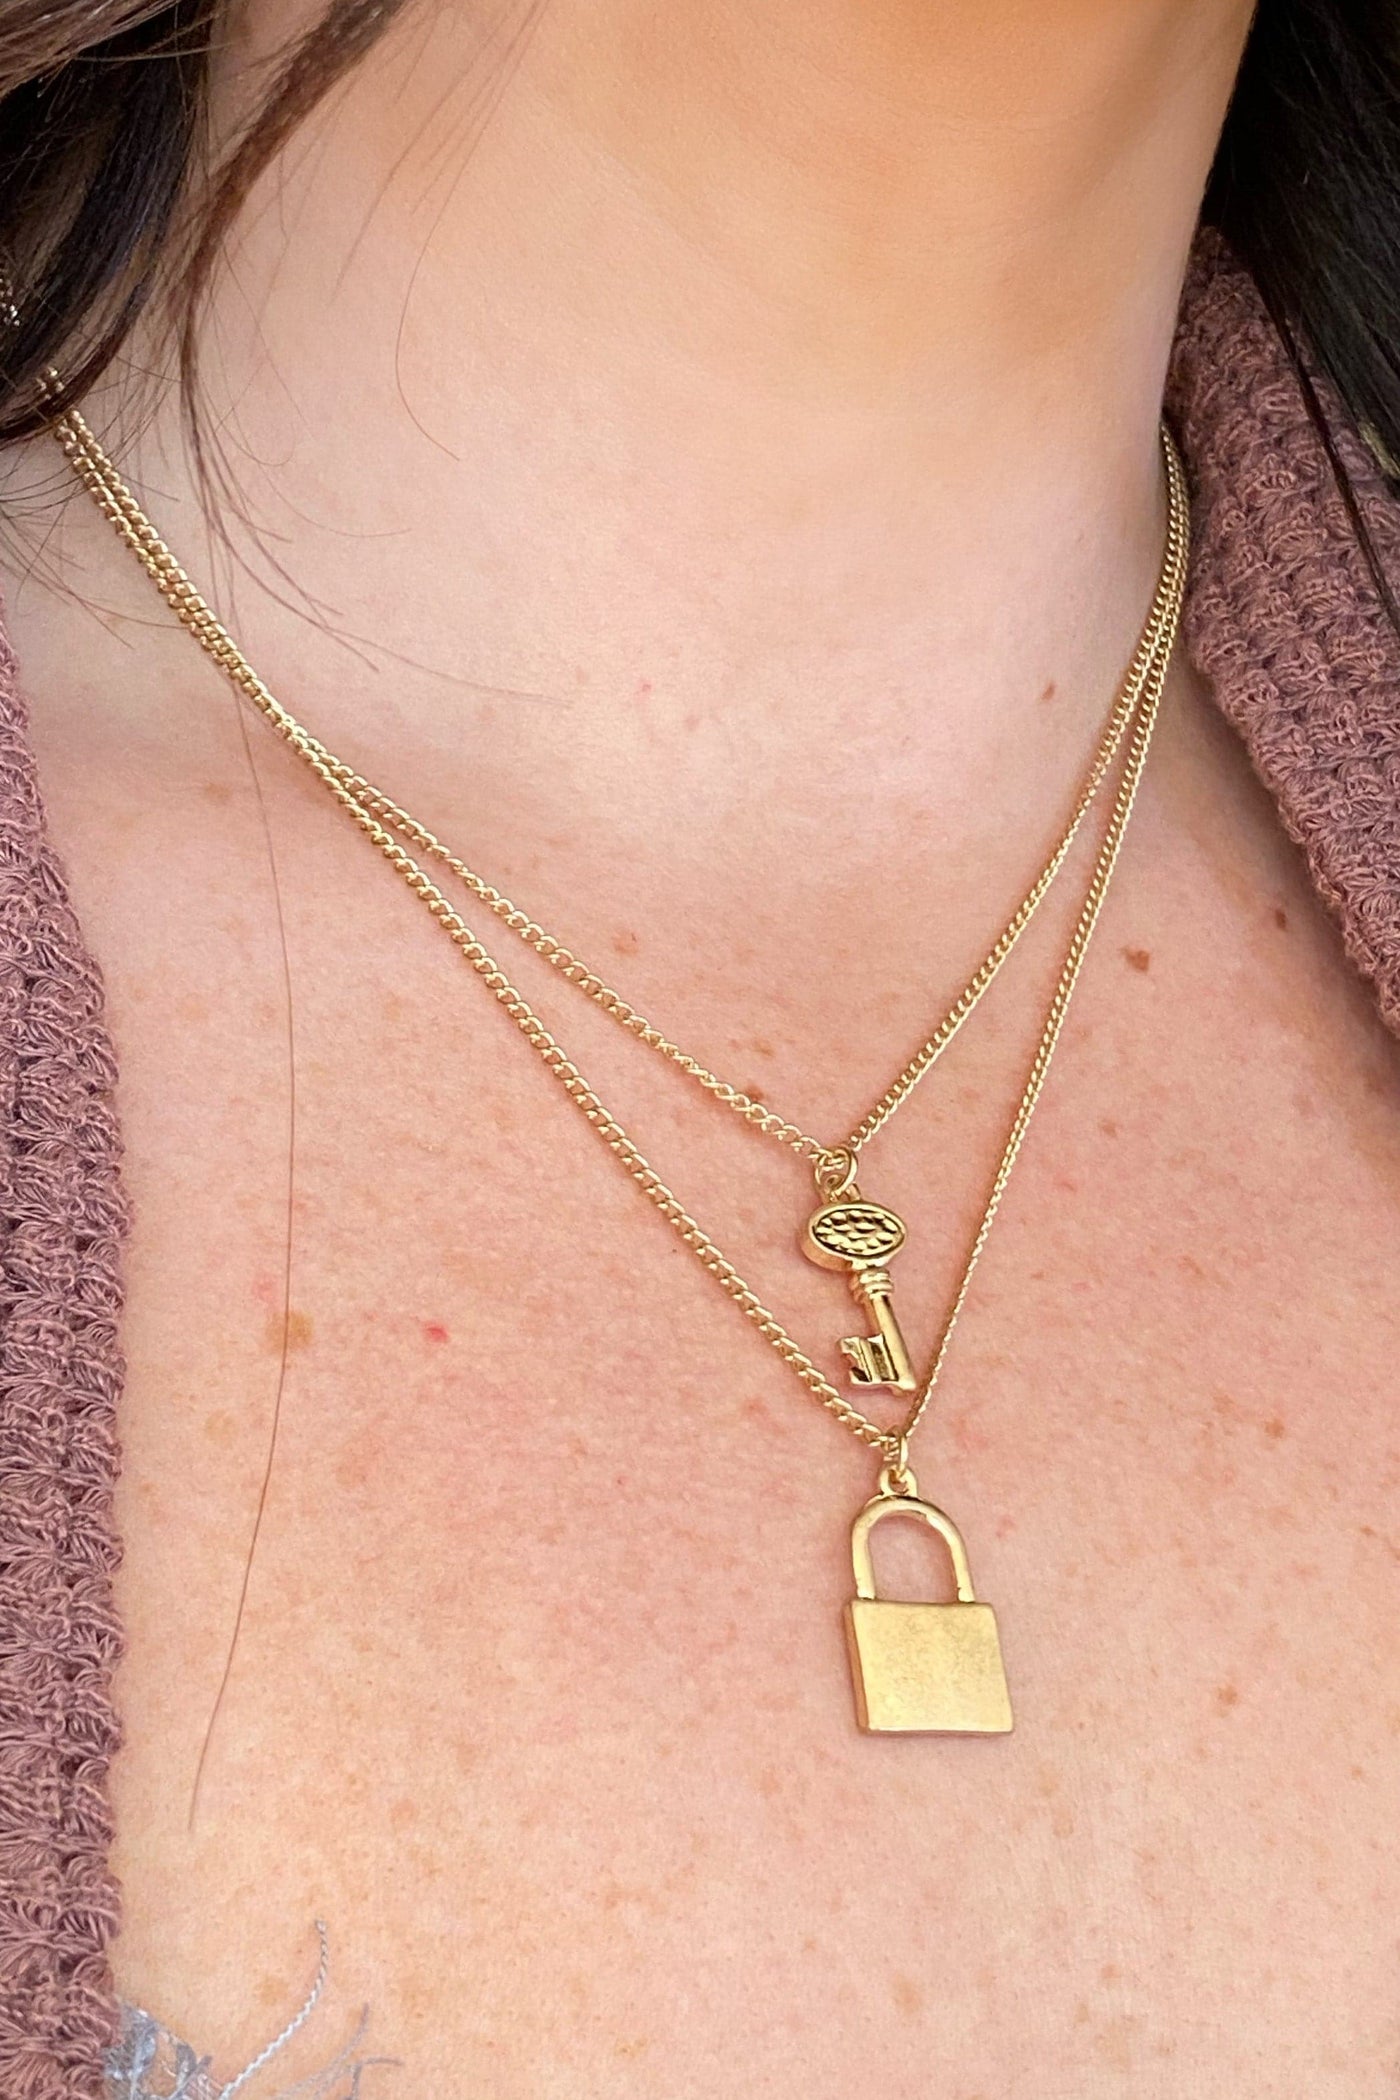 Gold It's a Secret Lock and Key Layered Necklace - Madison and Mallory